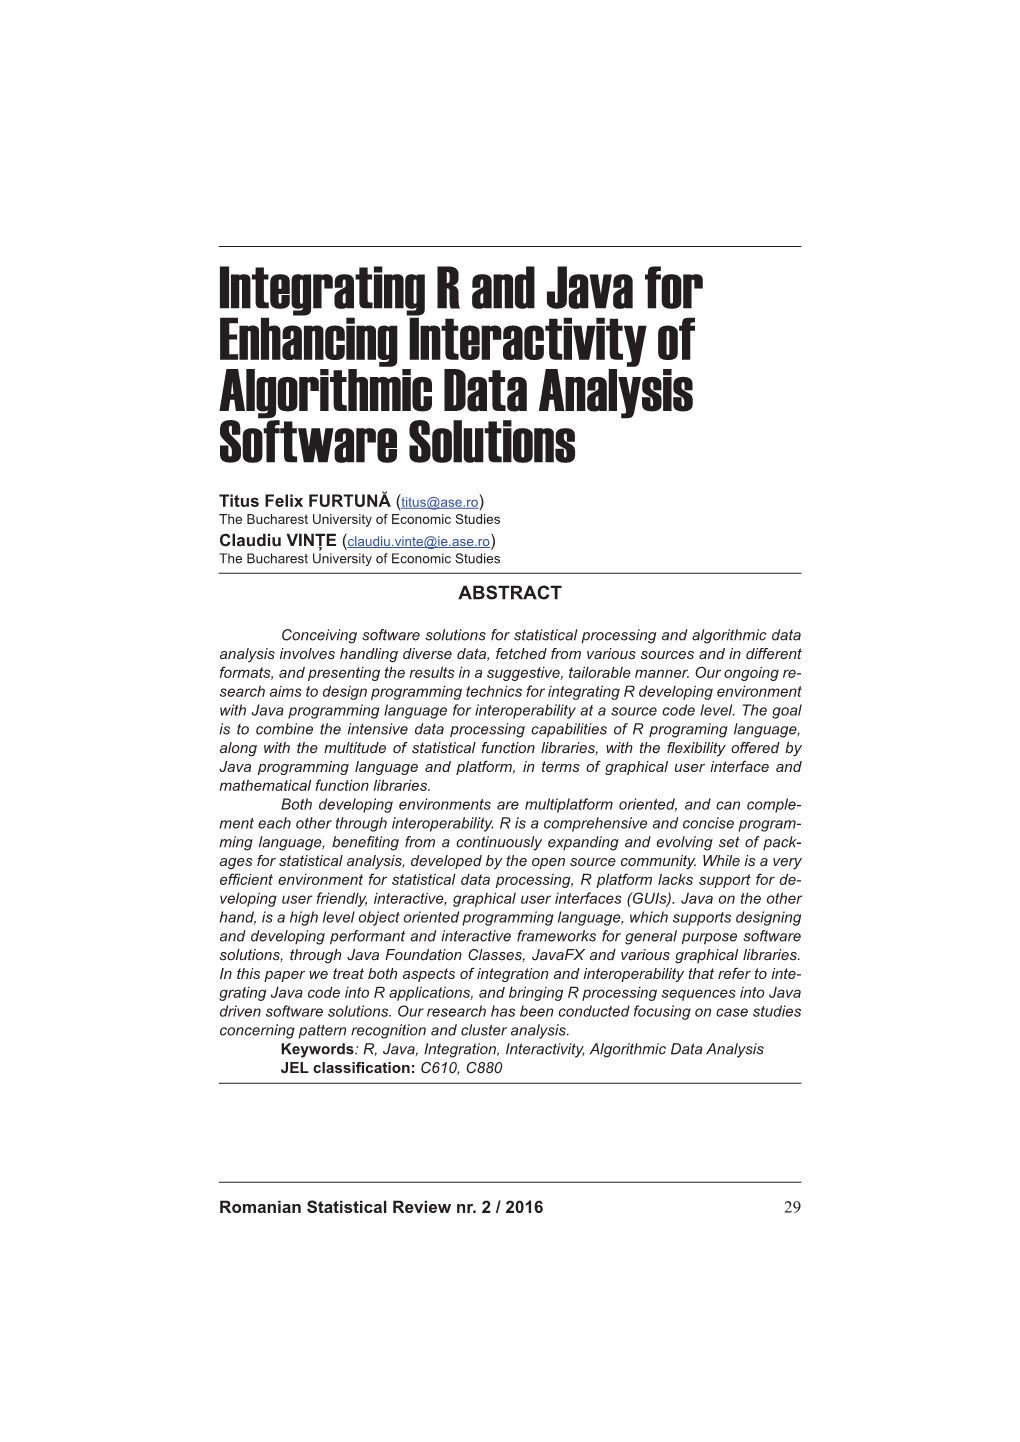 Integrating R and Java for Enhancing Interactivity of Algorithmic Data Analysis Software Solutions